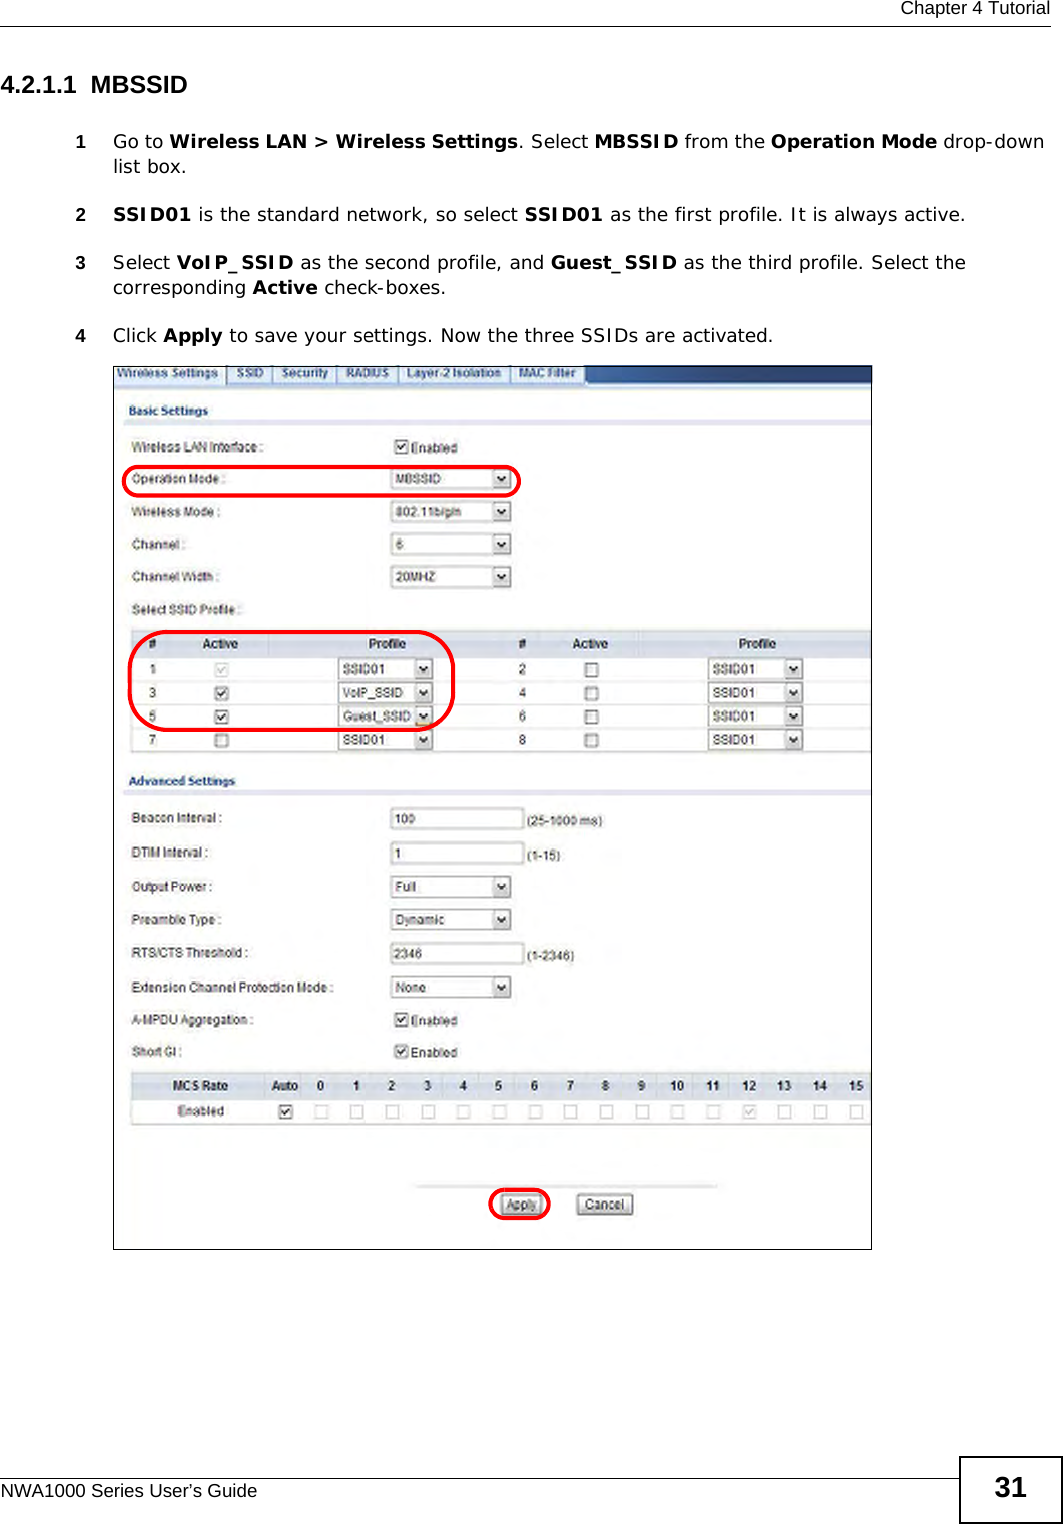  Chapter 4 TutorialNWA1000 Series User’s Guide 314.2.1.1  MBSSID1Go to Wireless LAN &gt; Wireless Settings. Select MBSSID from the Operation Mode drop-down list box. 2SSID01 is the standard network, so select SSID01 as the first profile. It is always active. 3Select VoIP_SSID as the second profile, and Guest_SSID as the third profile. Select the corresponding Active check-boxes.4Click Apply to save your settings. Now the three SSIDs are activated.